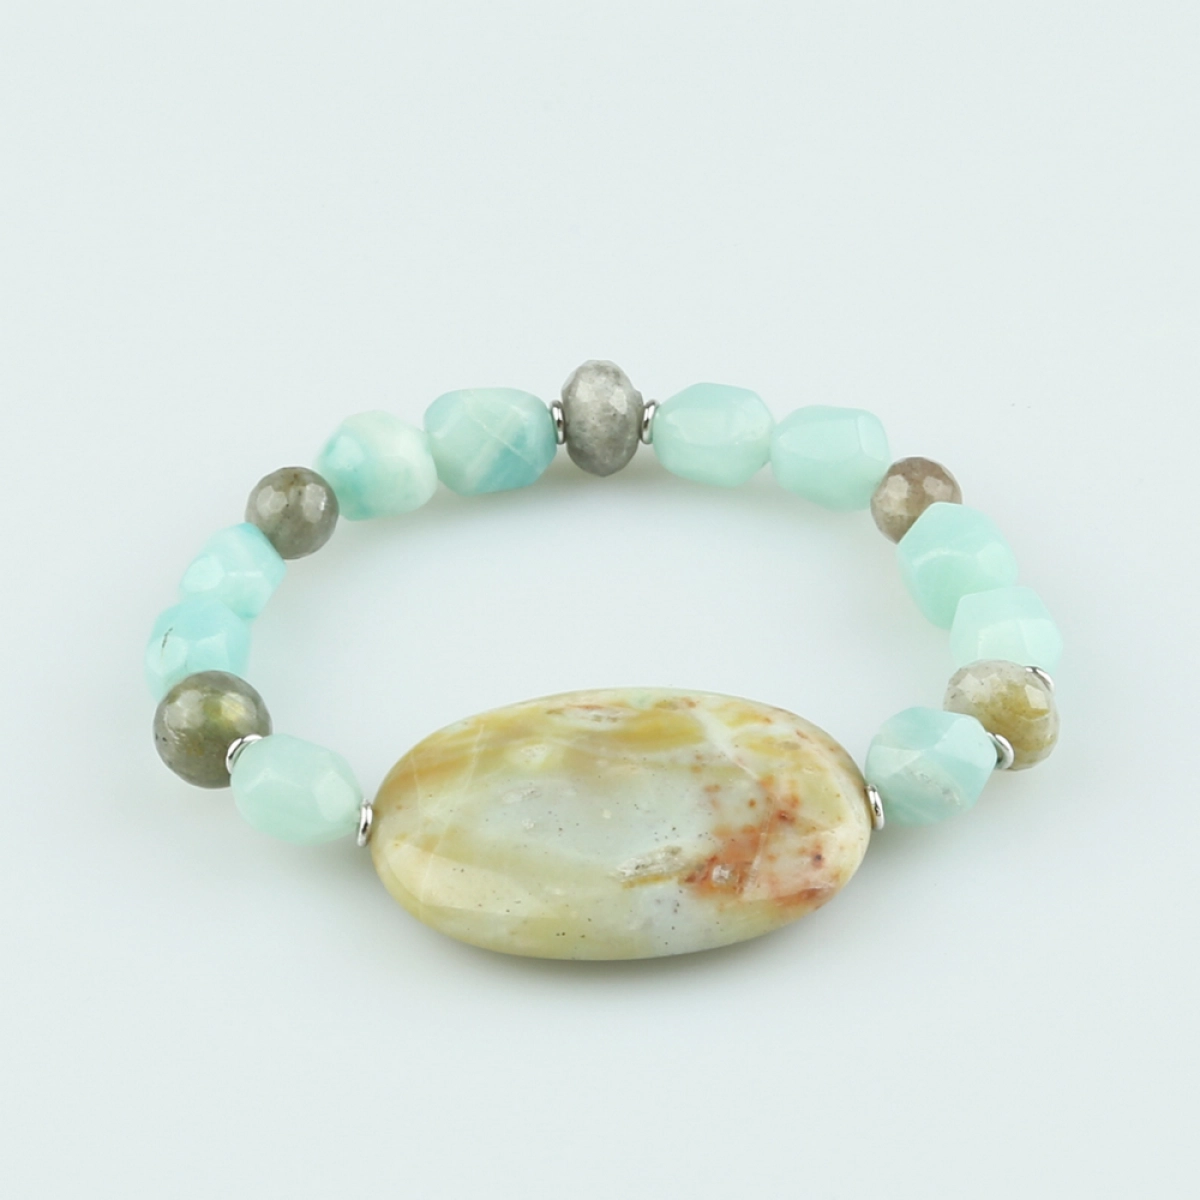 ELASTICATED WRIST WITH A CENTRAL PIECE OF AMAZONITE FPU62G PATRICIA GARCIA